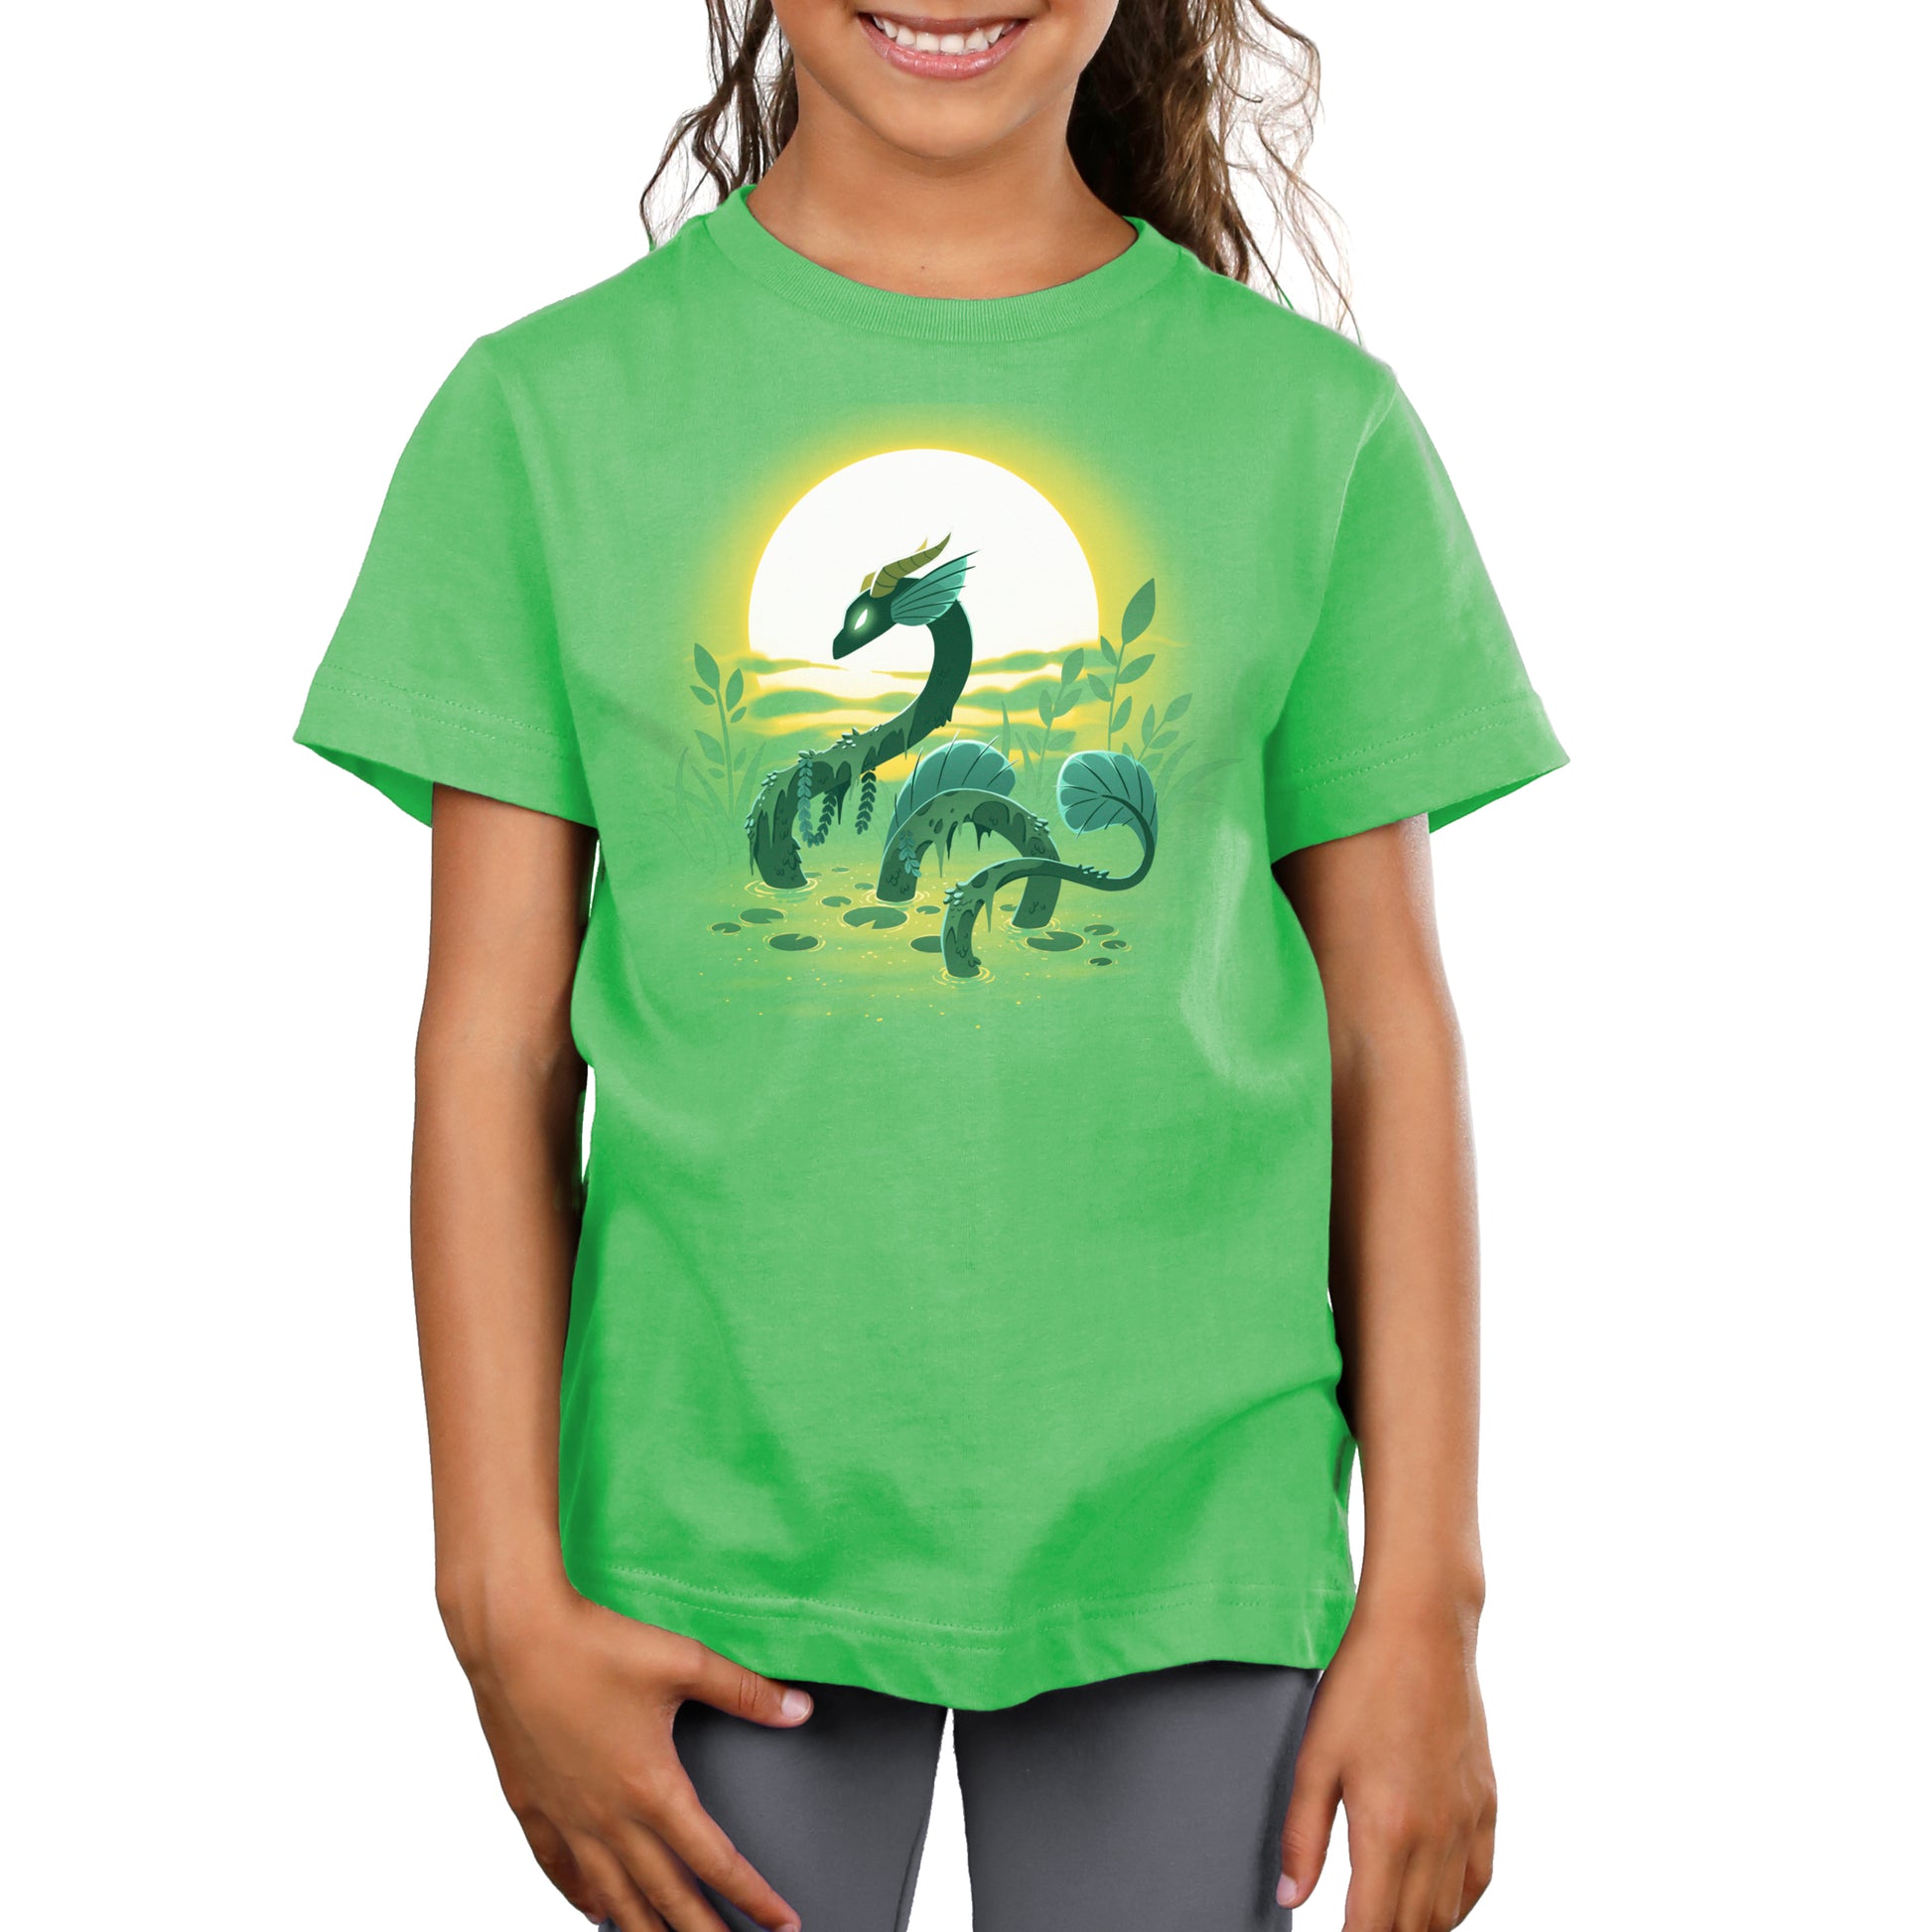 A girl wearing a green Swamp Dragon T-shirt made of Super Soft Ringspun Cotton by TeeTurtle.